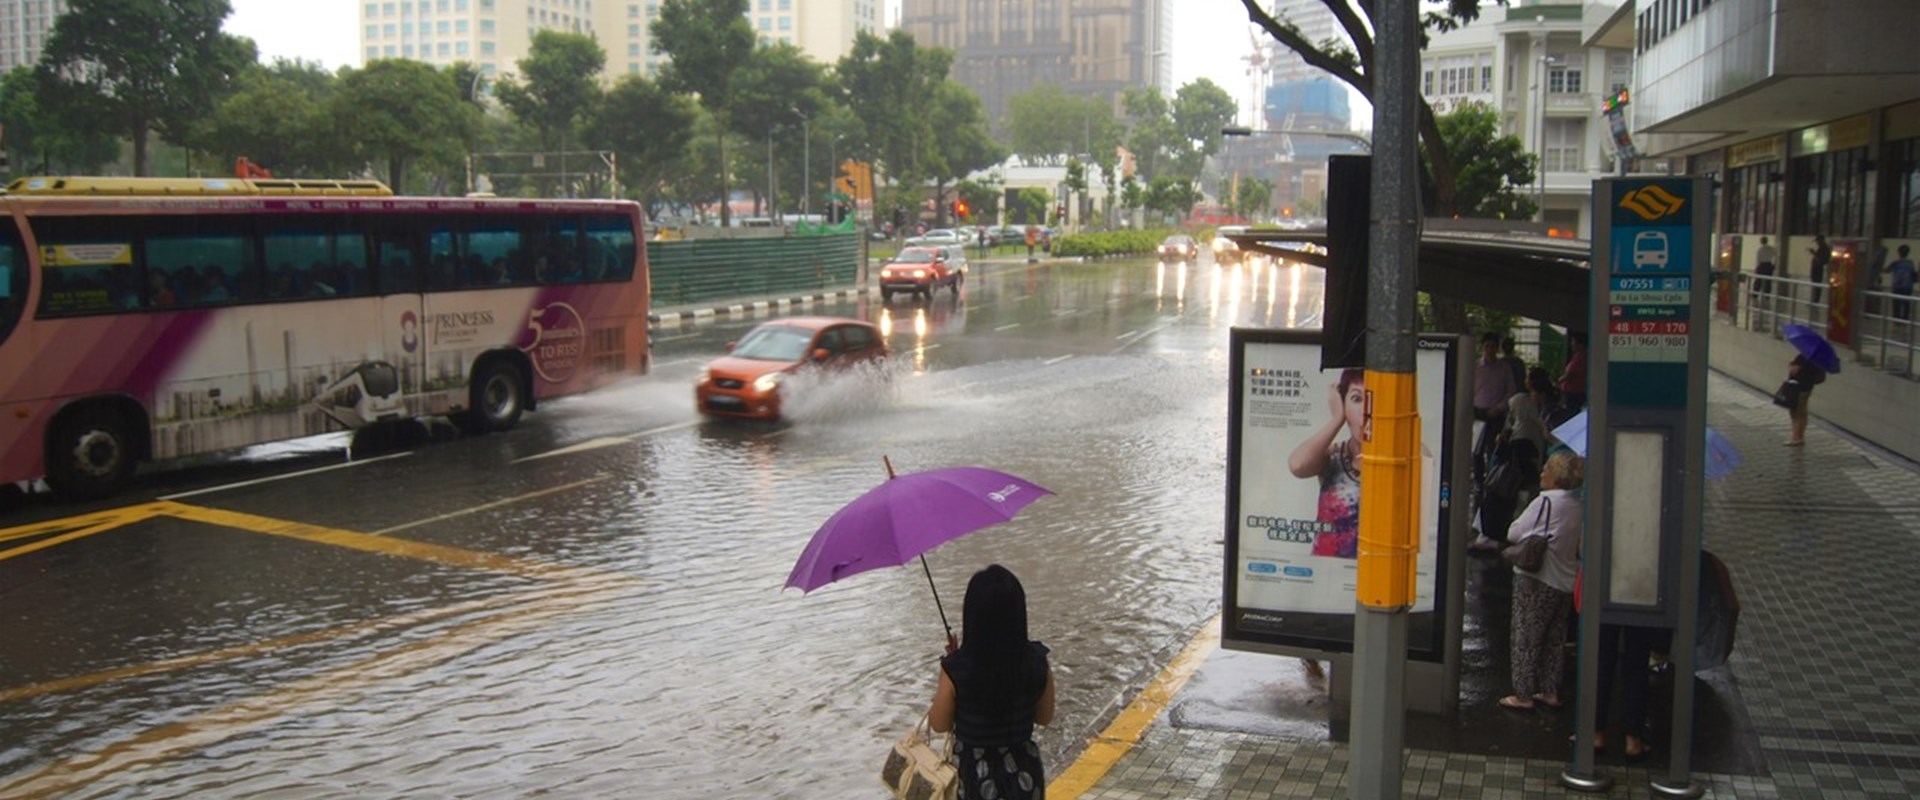 An image of flooding in a Singapore street